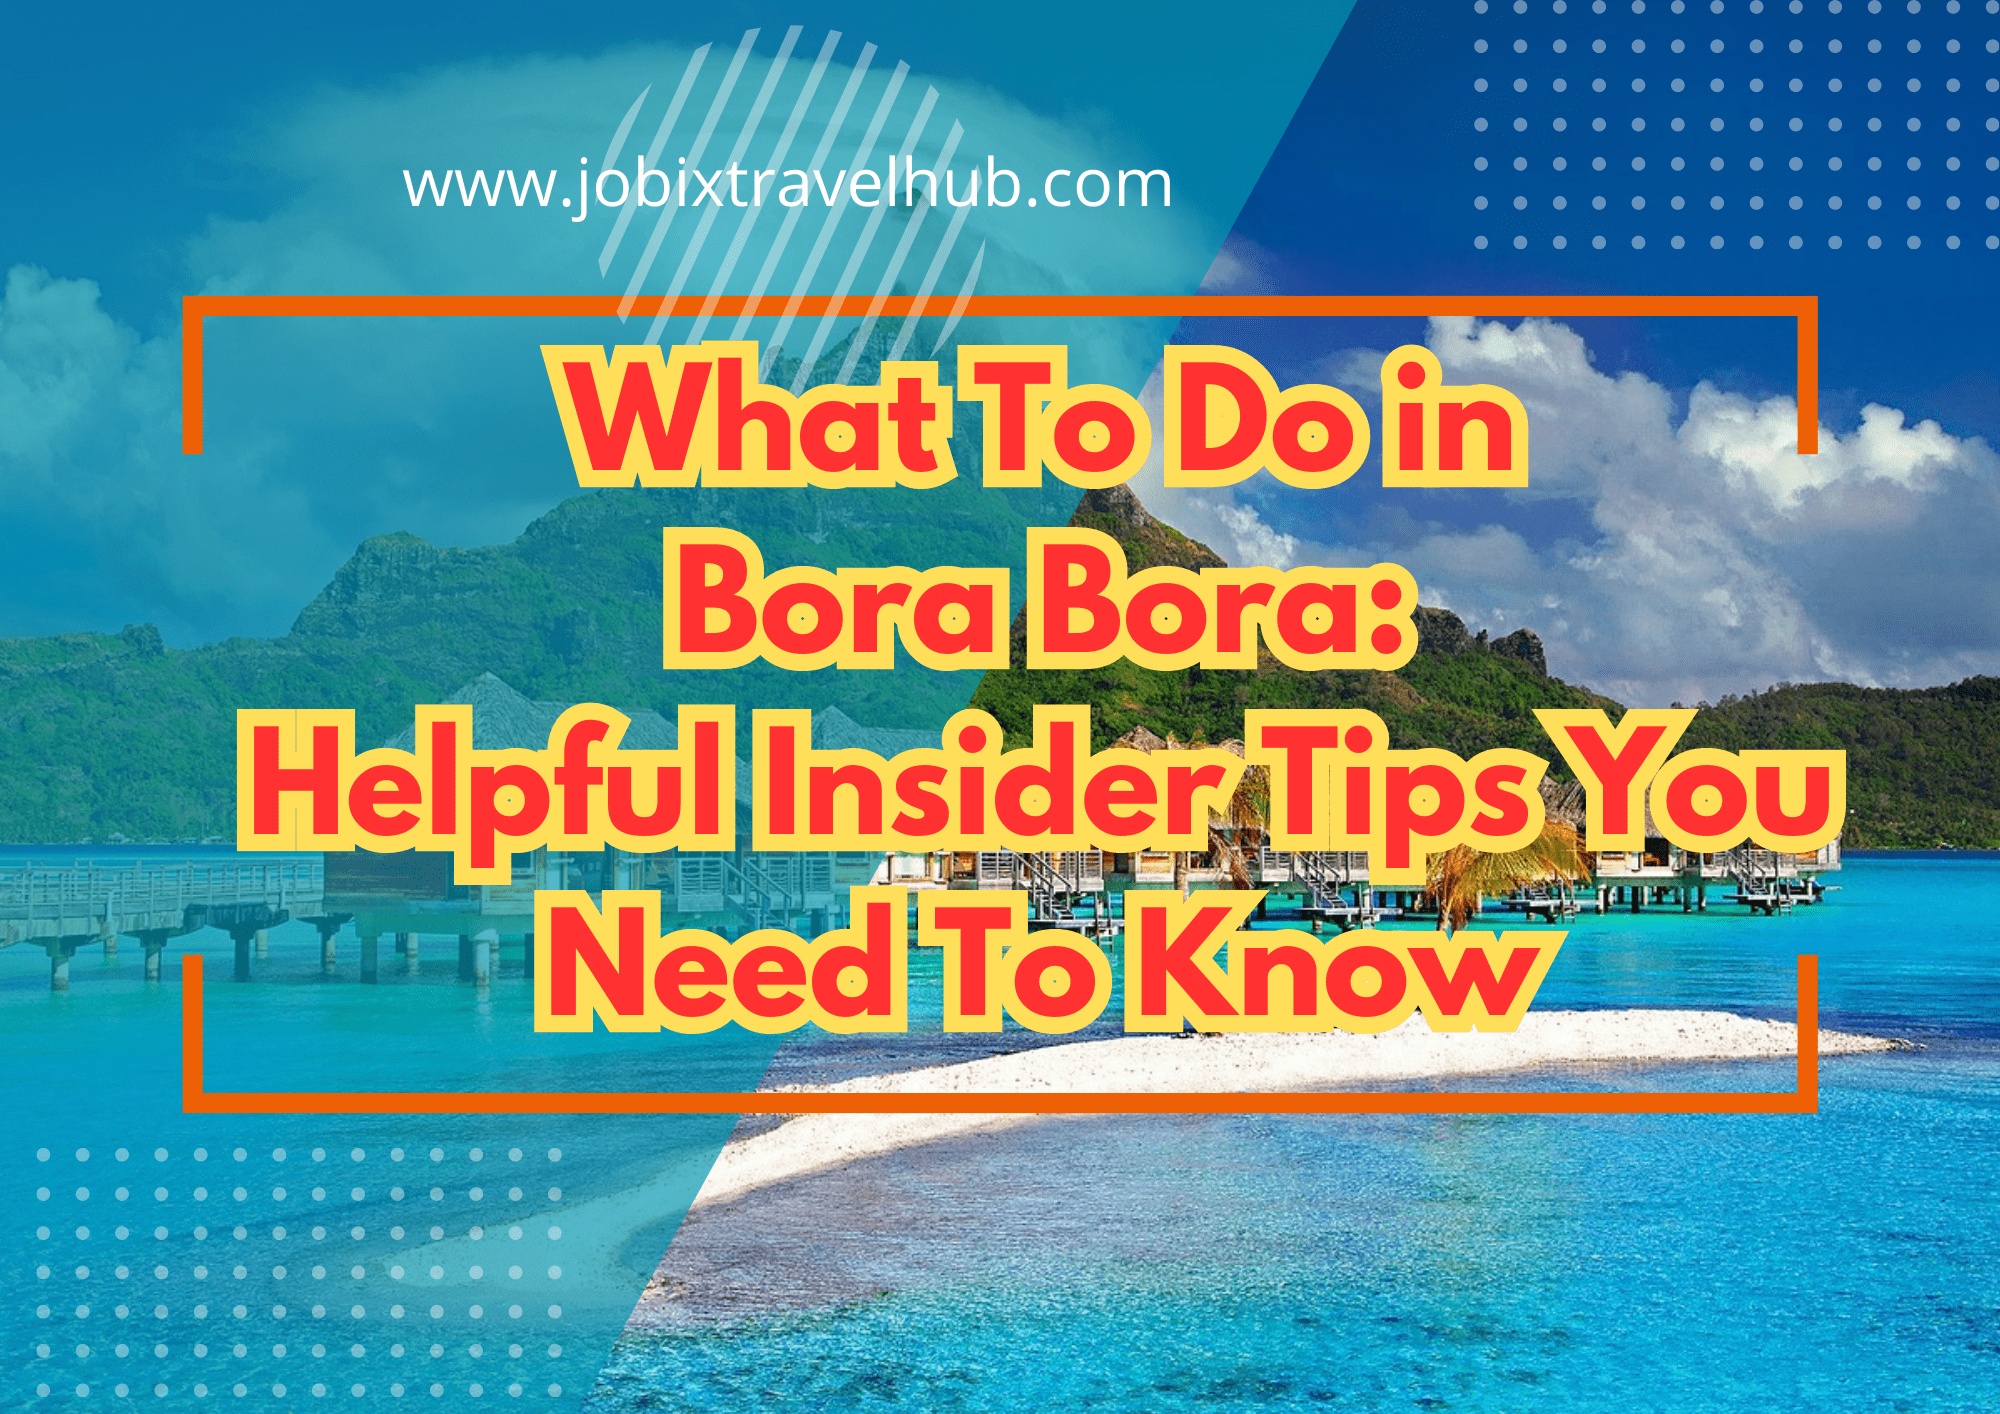 What To Do in Bora Bora: Helpful Insider Tips You Need To Know